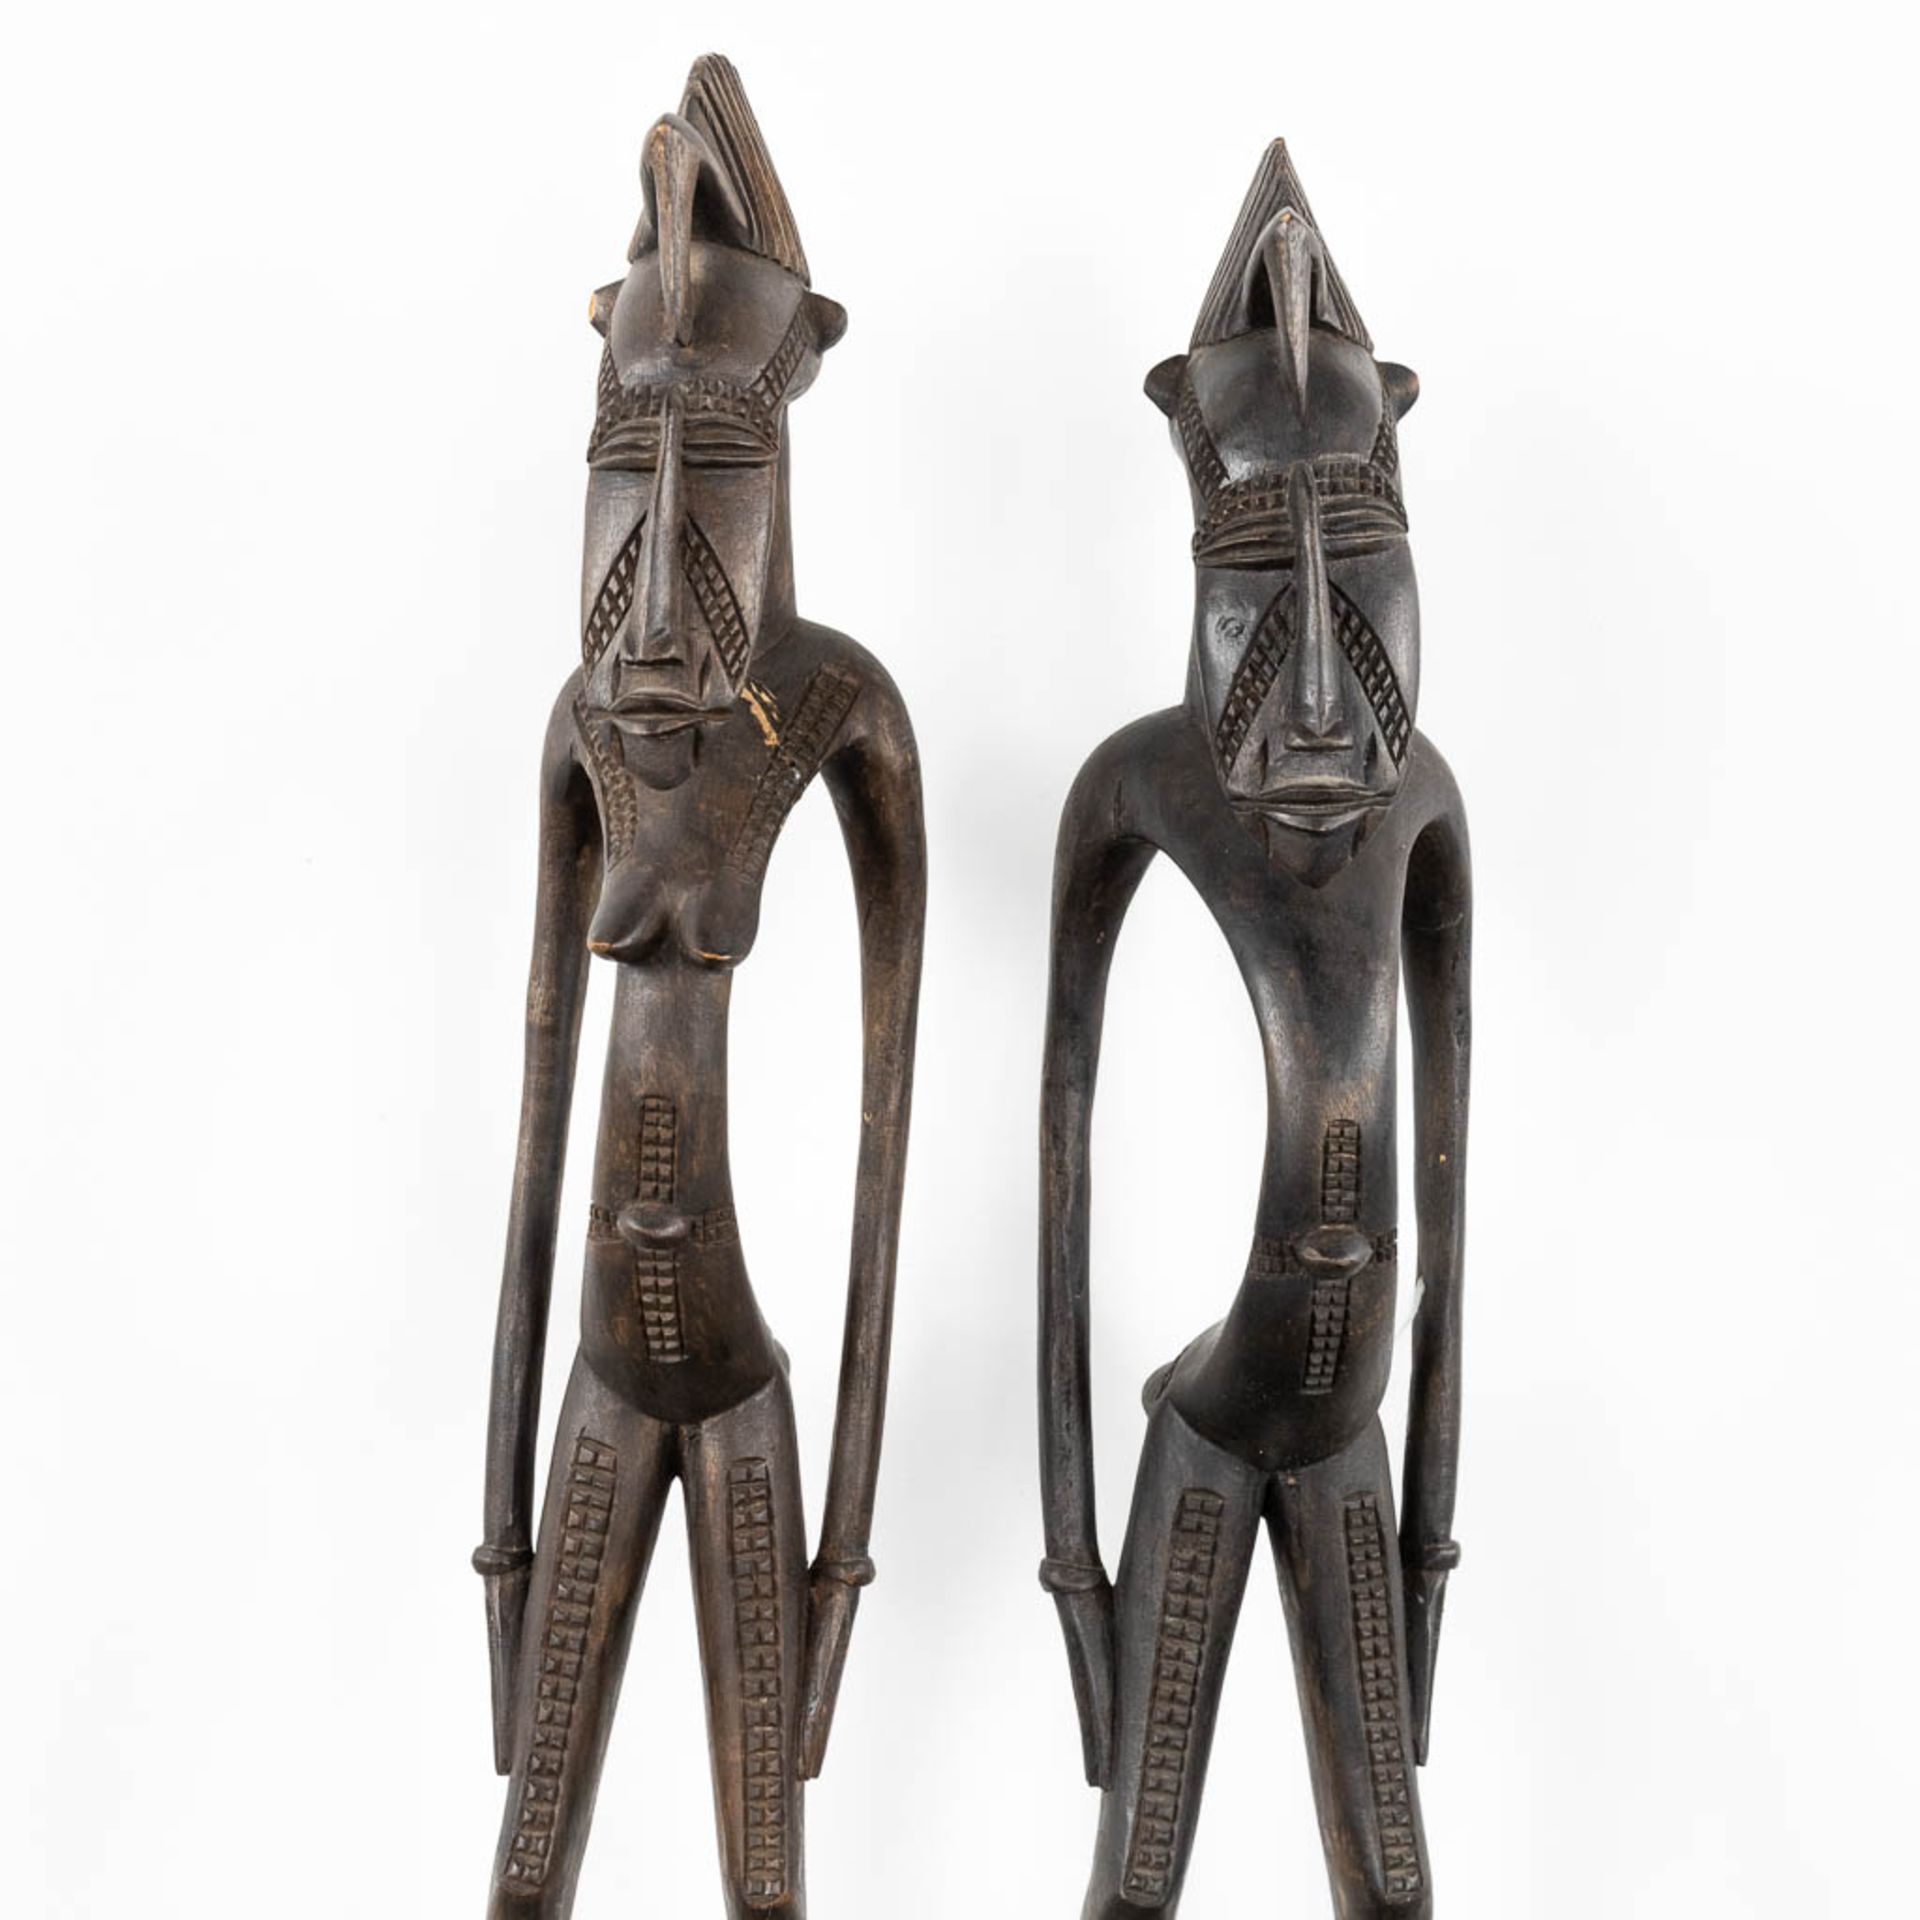 A collection of African masks and ceramic items. (H:124 cm) - Image 3 of 16